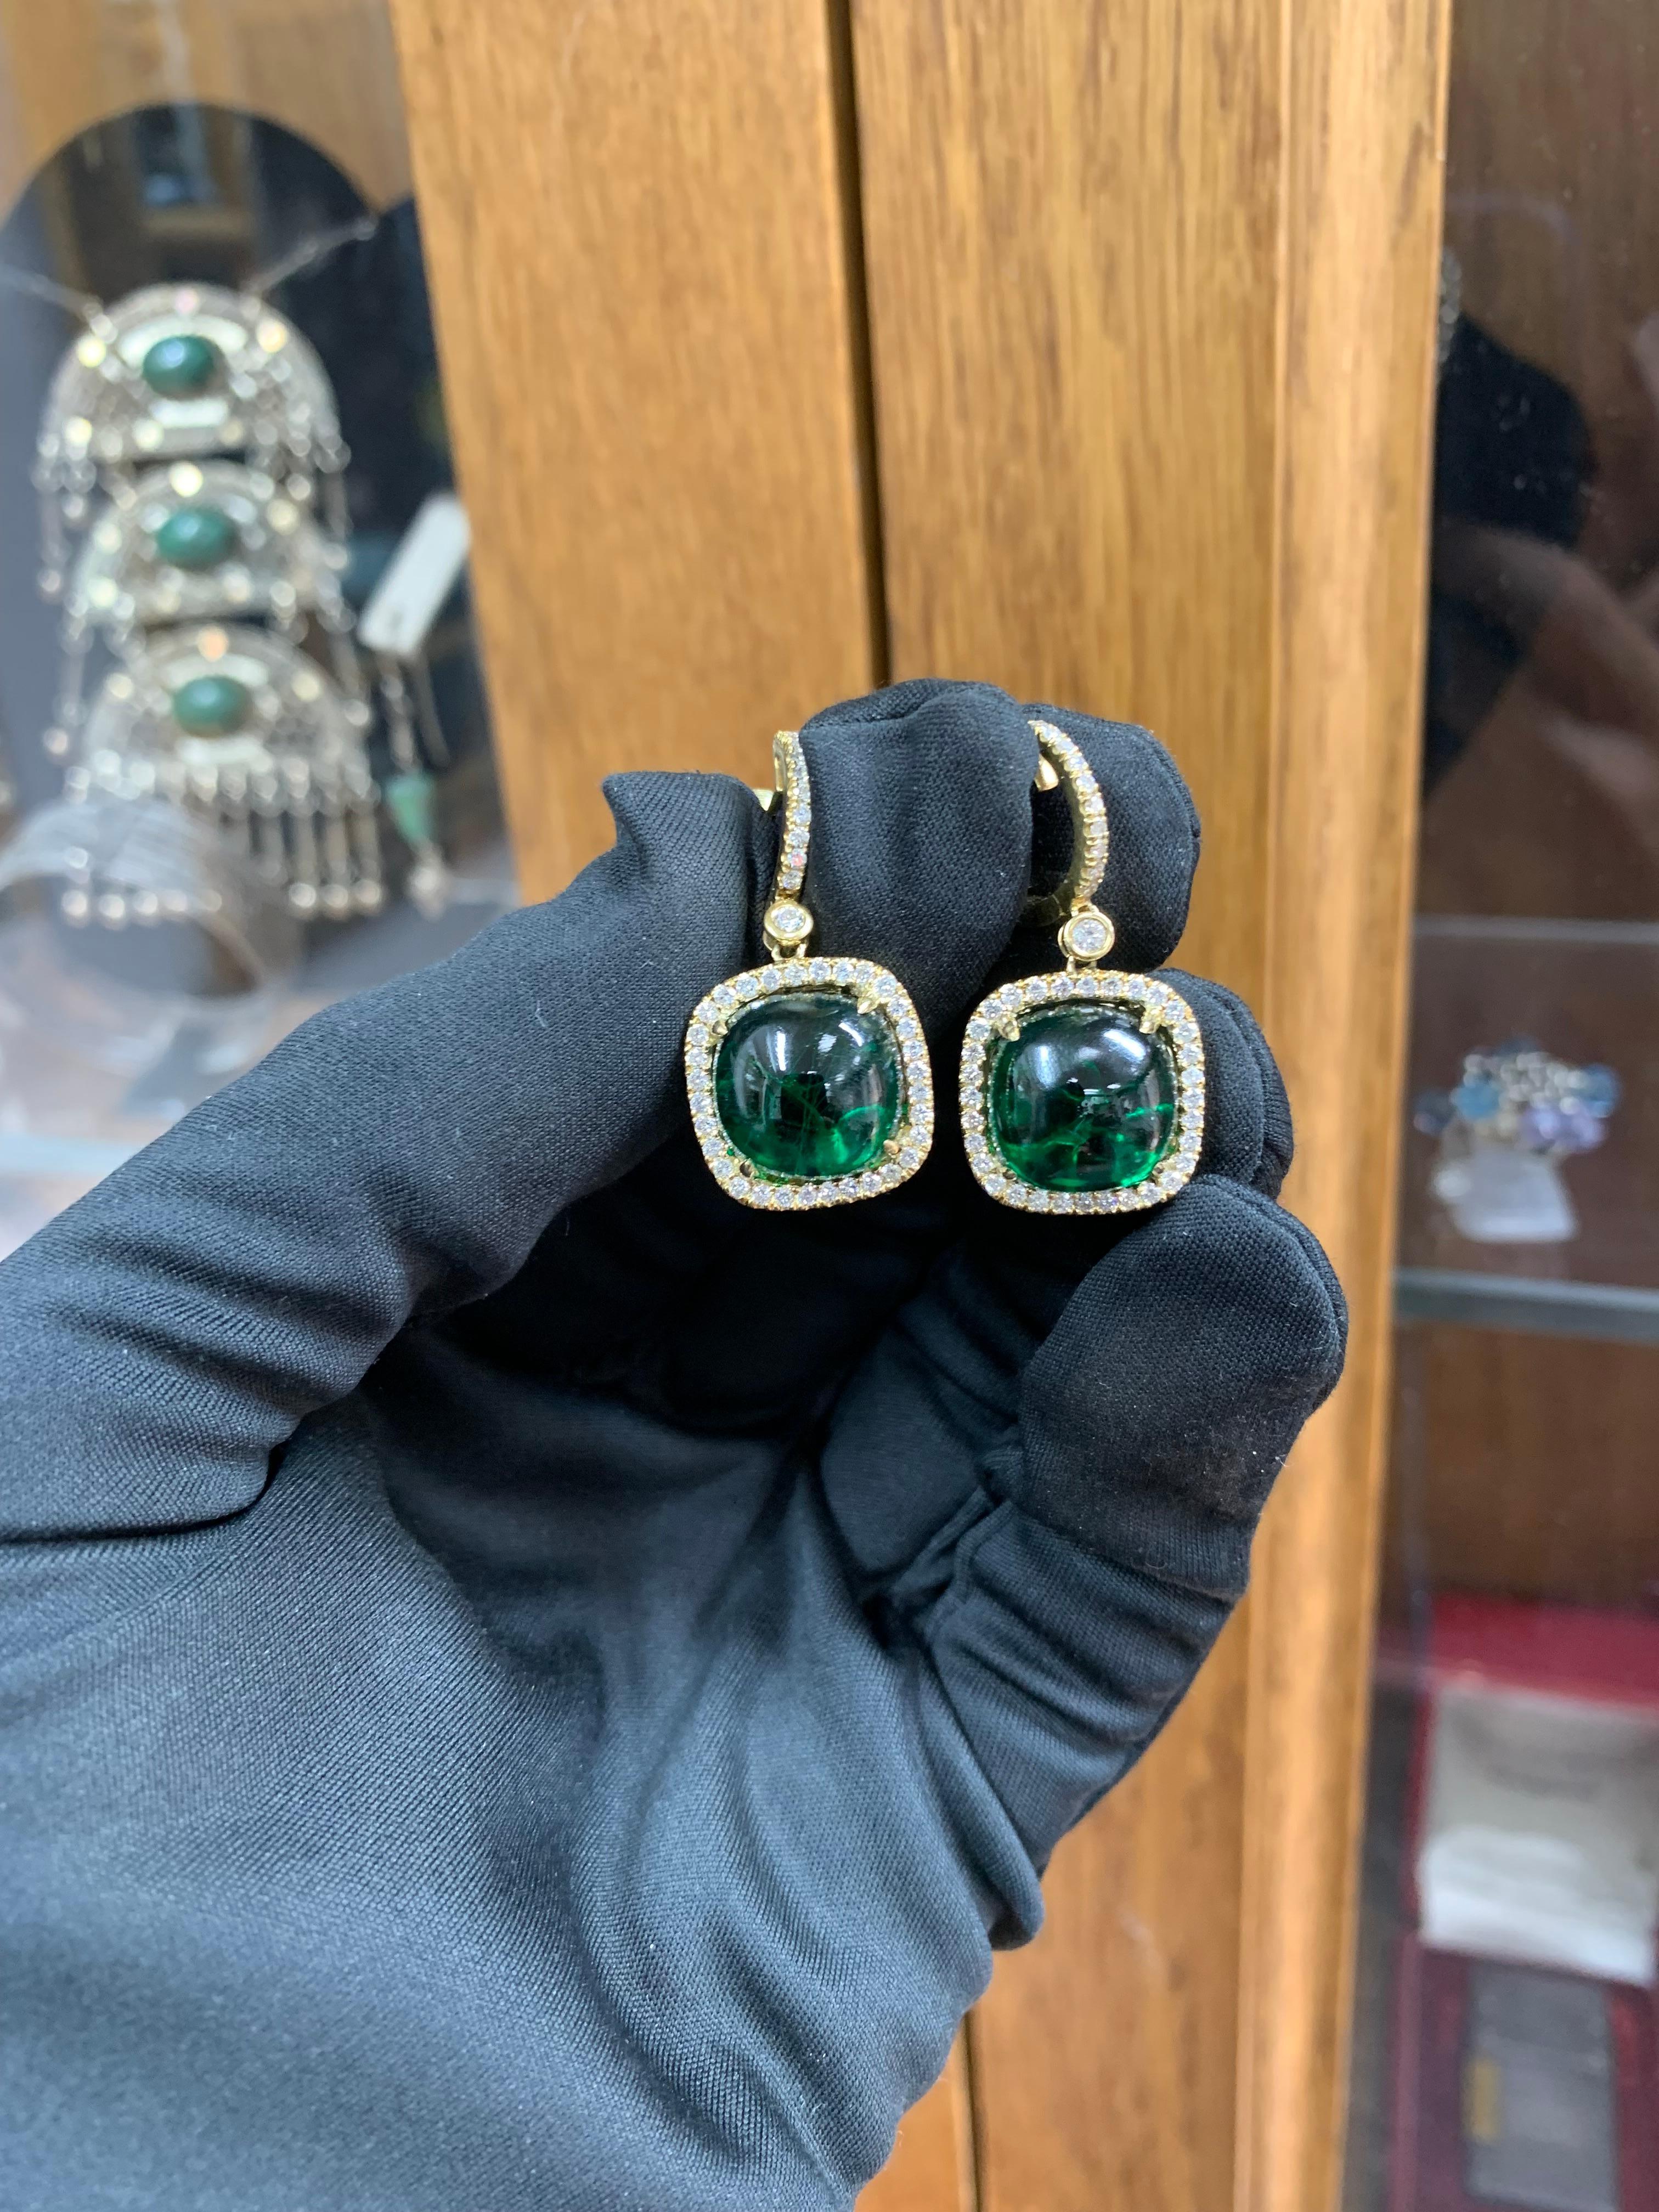 Beautifully Hand Crafted & Engraved 18k Solid Yellow Gold Earrings Set With Synthetic Green Tourmaline & Natural Diamonds.
Amazing Shine, Incredible Craftsmanship.
Approximately 6.0 Carats Of Green (Synthetic) Tourmaline.
Approximately 0.65 Carats